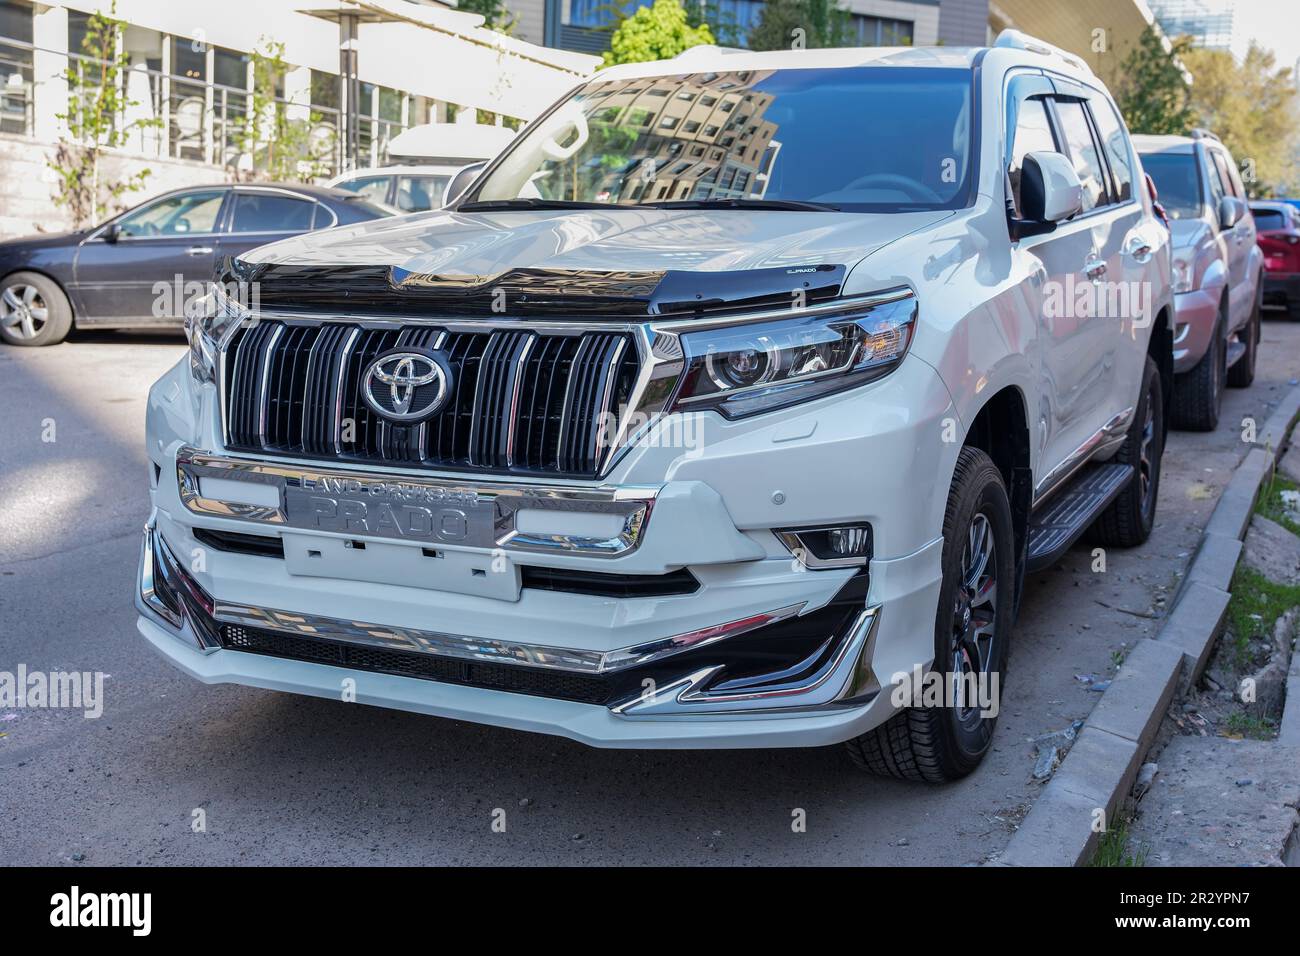 Almaty, Kazakhstan - May 4, 2023: The new Toyota Land Cruiser Prado is parked near the curb. 2023 release Stock Photo